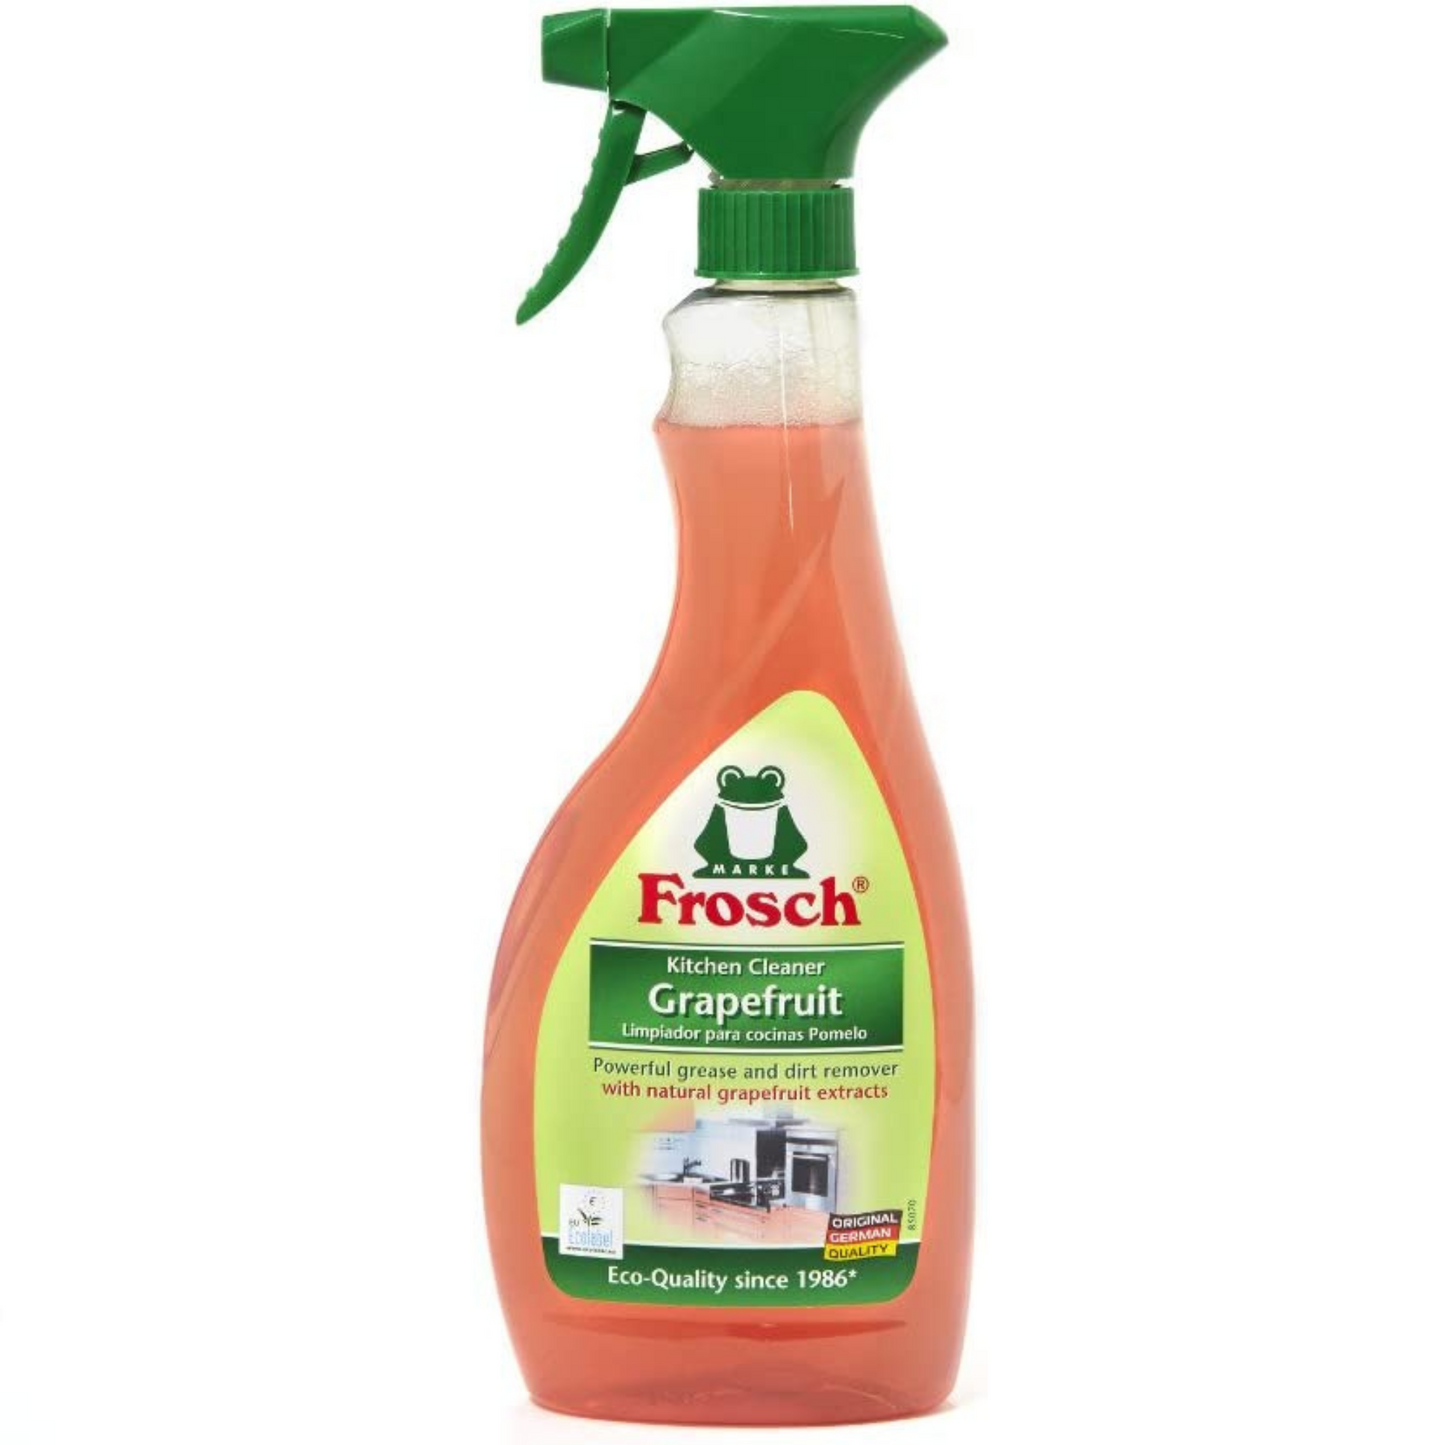 Primary Image of Frosch Grapefruit Grease Removing Spray (500 ml)